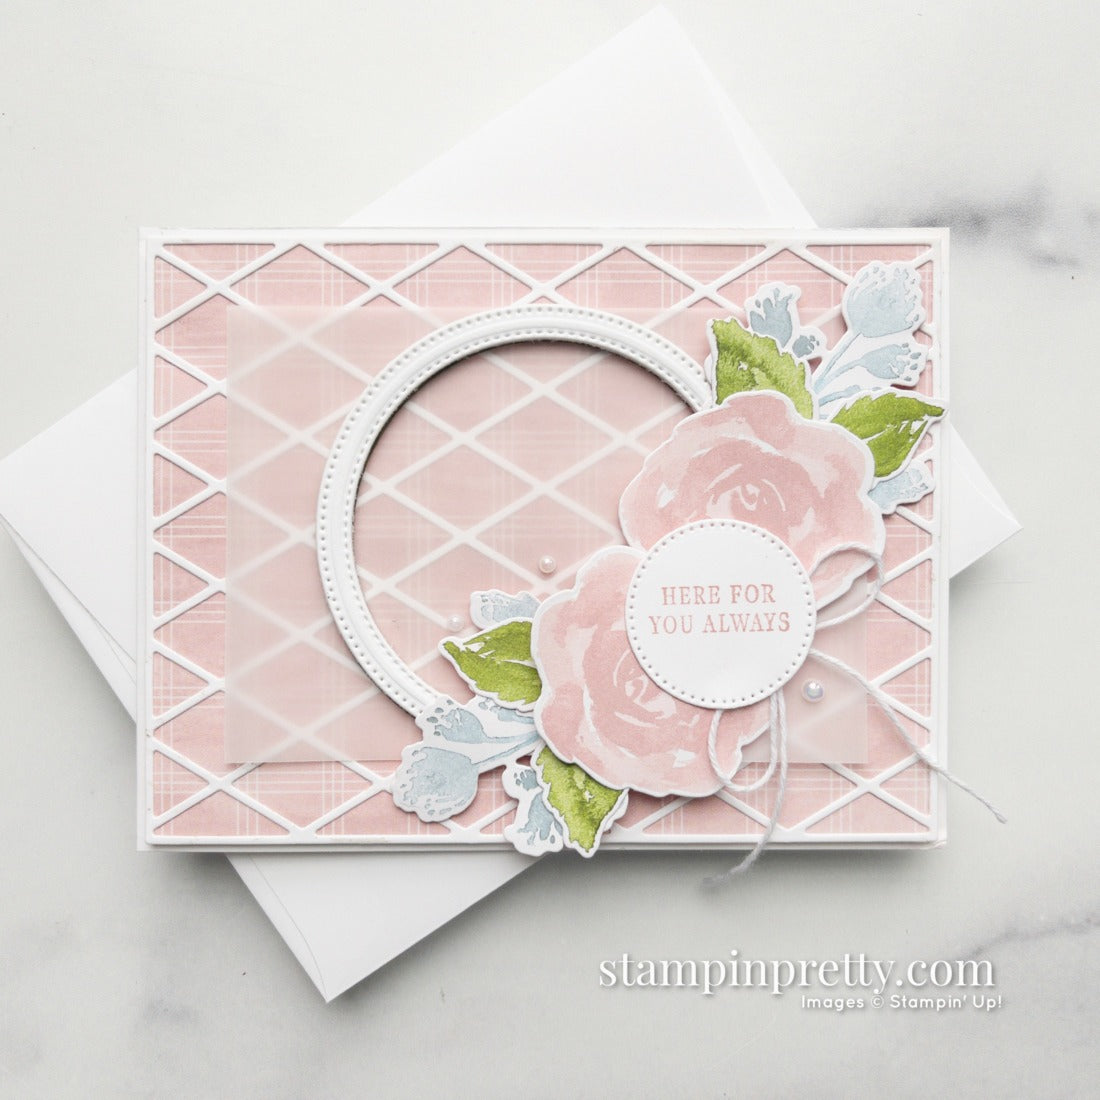 Stampin' Up! Awash in Beauty DSP